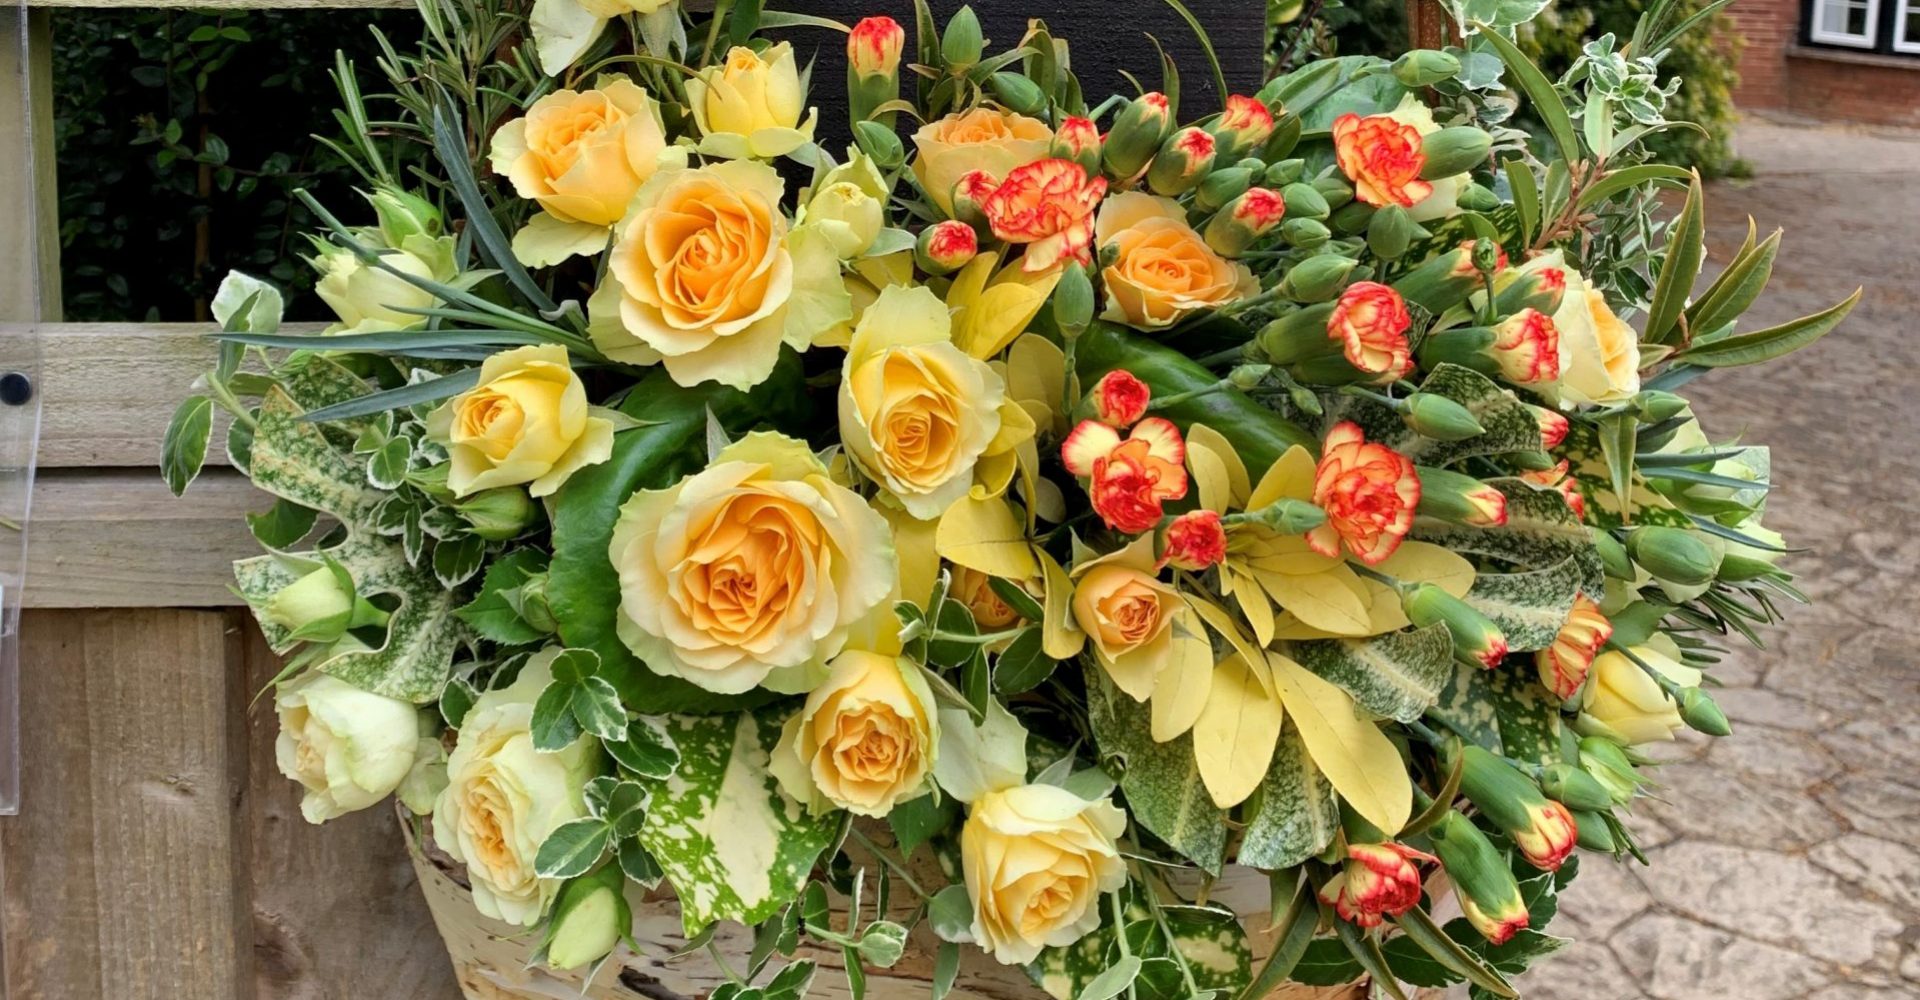 NATIONAL FLOWER ARRANGING DAY FRIDAY 7TH MAY 2021 » NAFAS